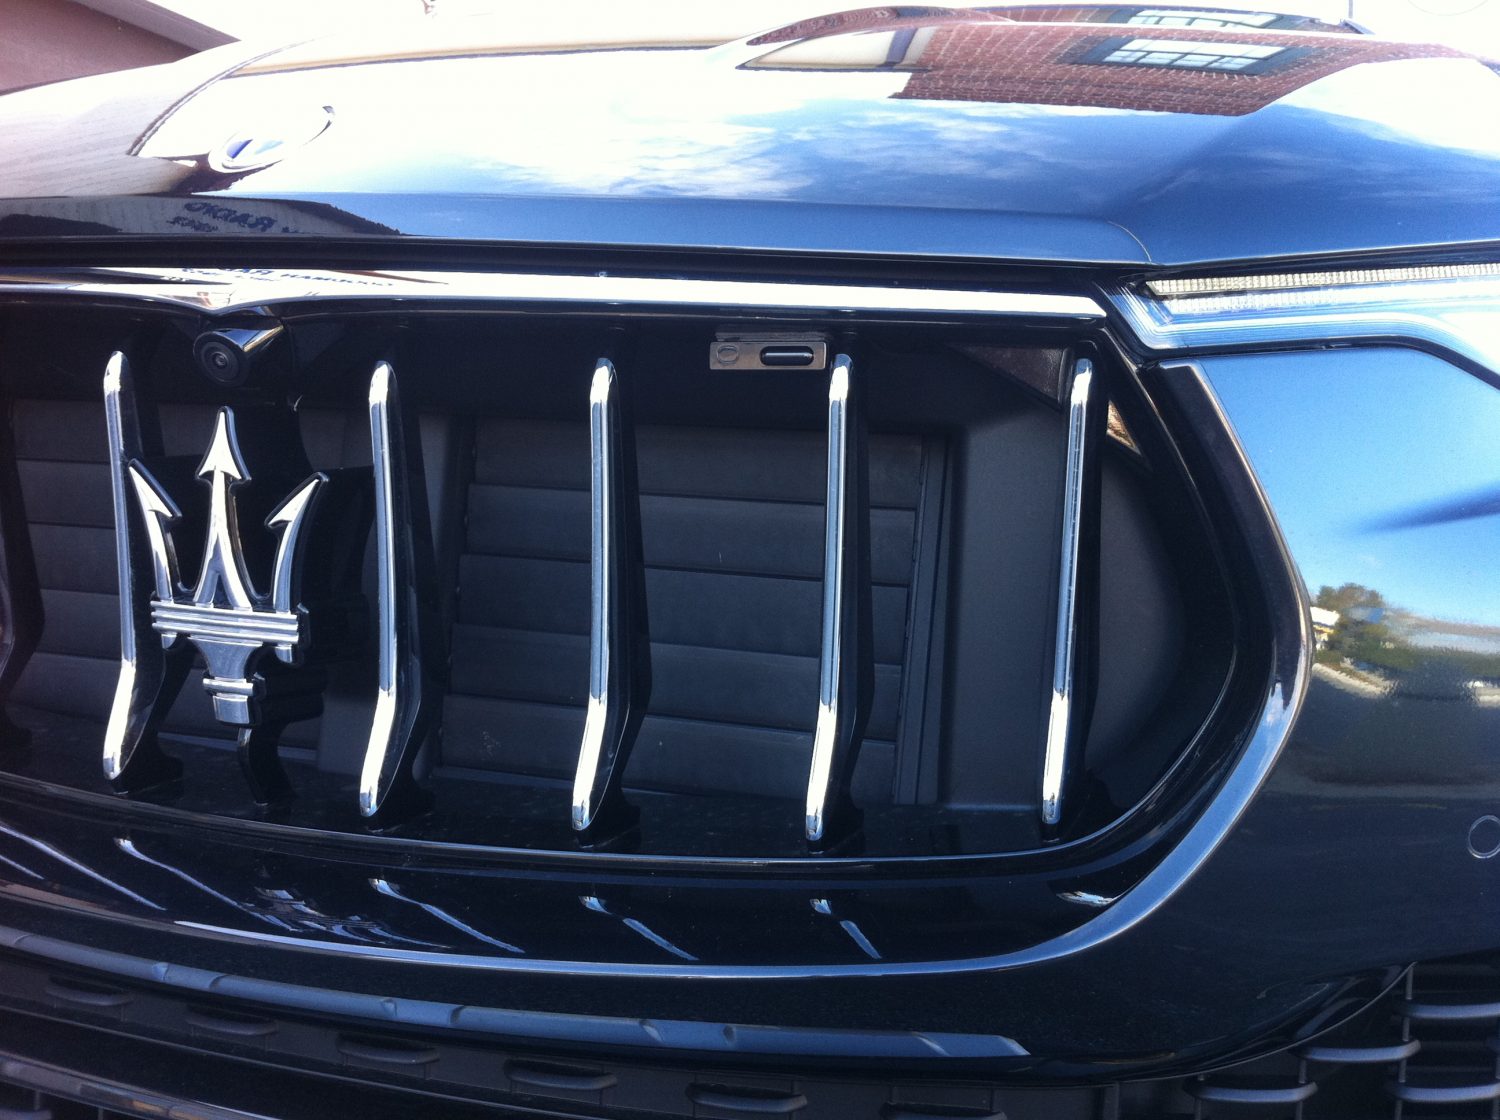 K40 front laser jammers on a 2018 Maserati Levante